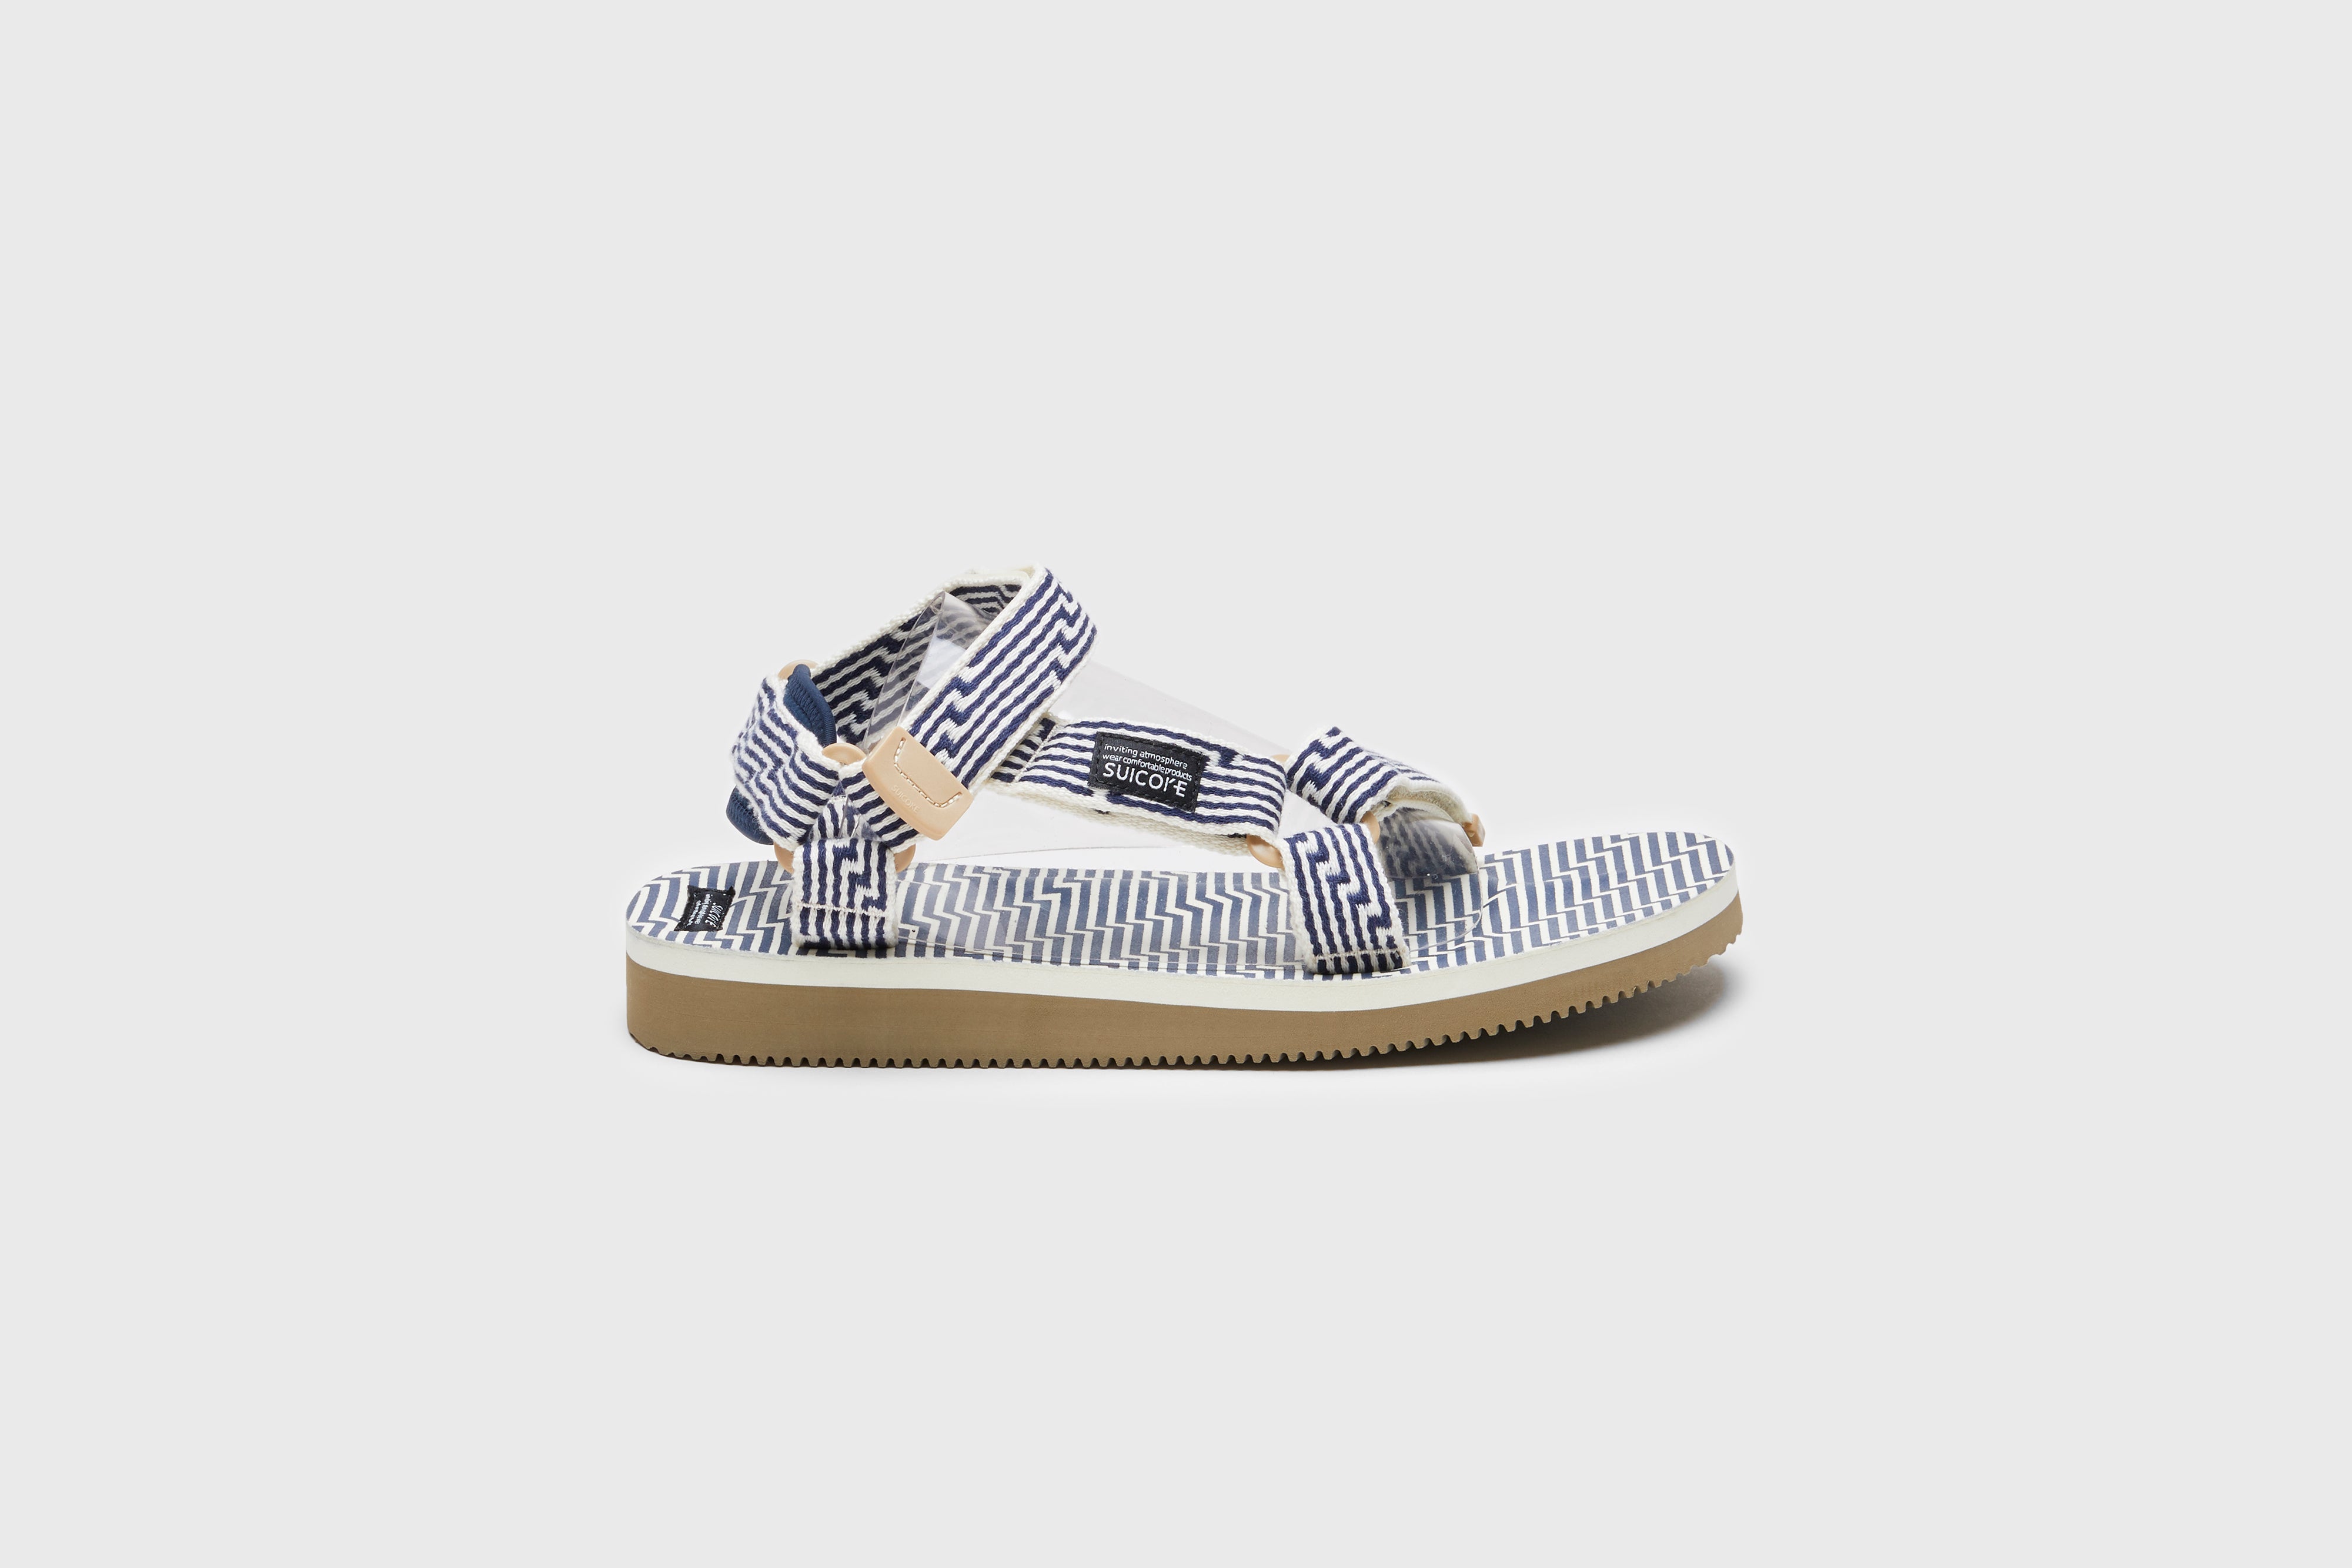 SUICOKE DEPA-JC01 sandals with ivory &amp; navy nylon upper, ivory &amp; navy midsole and sole, strap and logo patch. From Spring/Summer 2023 collection on eightywingold Web Store, an official partner of SUICOKE. OG-022-JC01 IVORY X NAVY